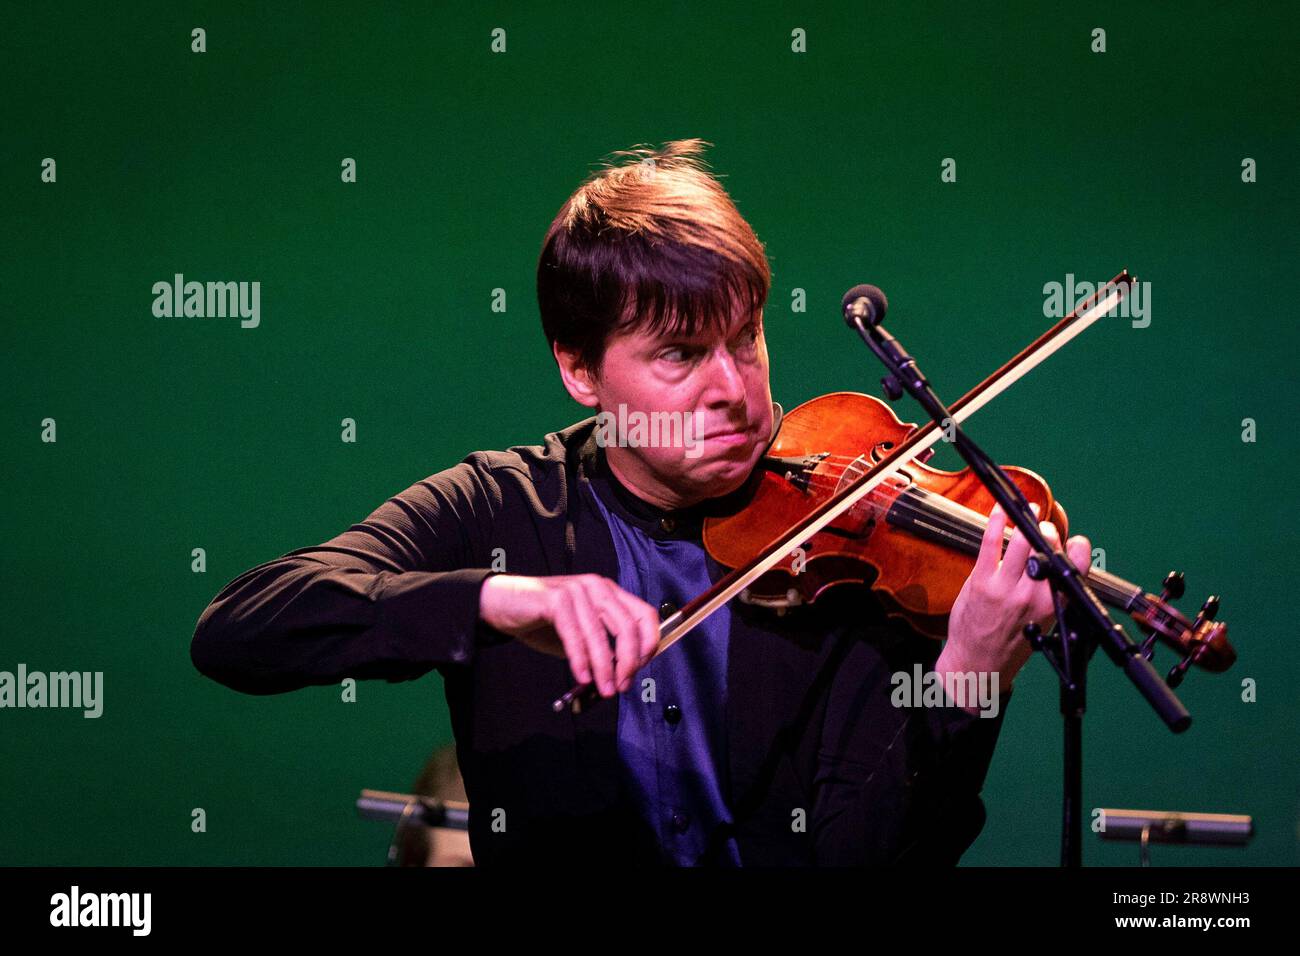 Washington, United States. 22nd June, 2023. Joshua Bell, violinist, performs during a state dinner for Narendra Modi, India's prime minister, at the White House in Washington, DC, on Thursday, June 22, 2023. Biden and Modi announced a series of defense and commercial deals designed to improve military and economic ties between their nations during a state visit today. Photo by Al Drago/UPI Credit: UPI/Alamy Live News Stock Photo